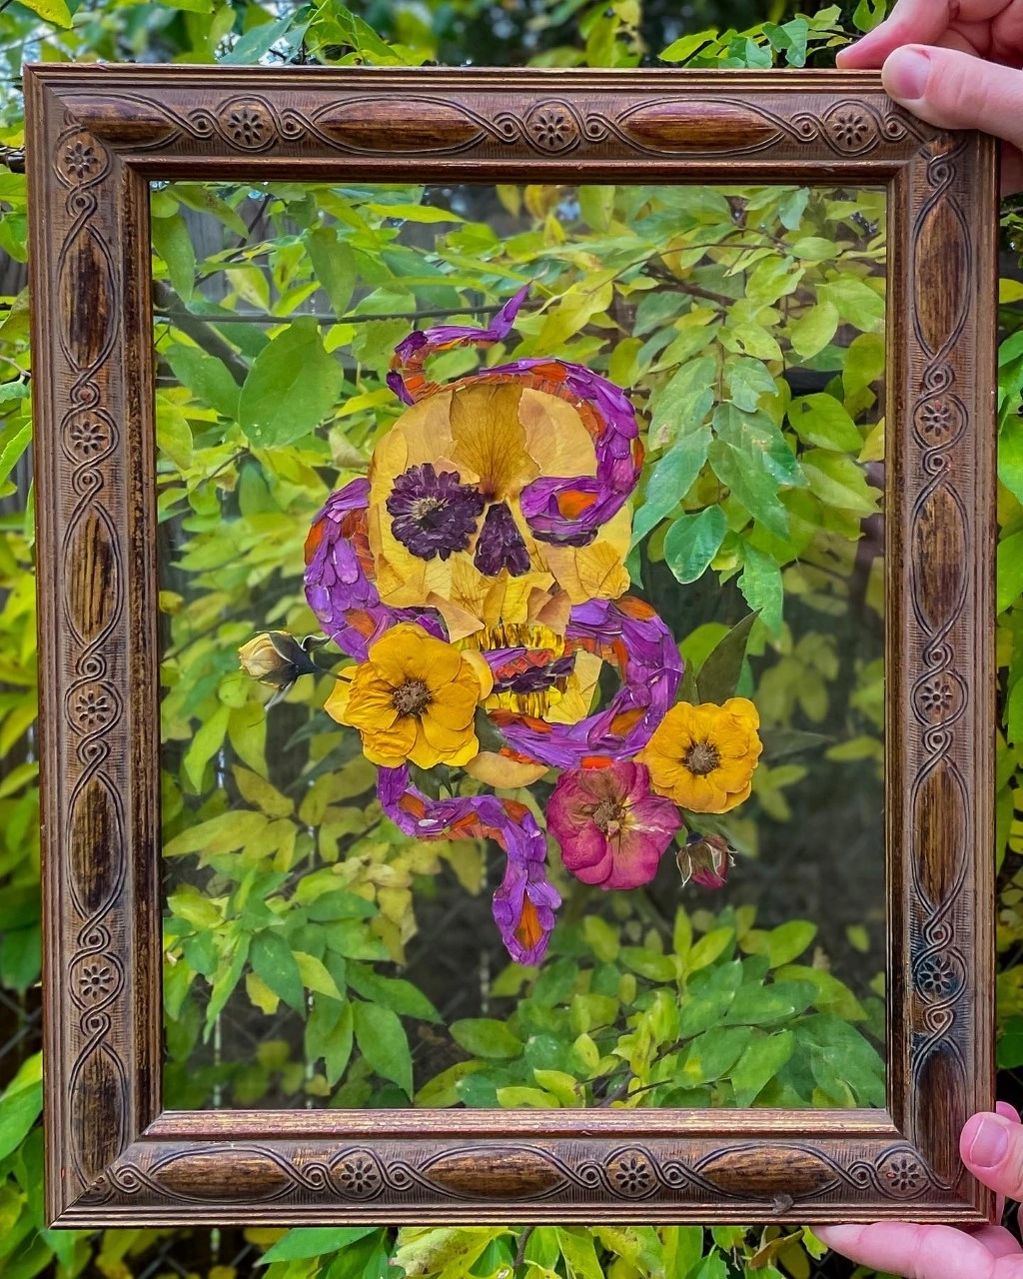 A skull and snake made out of pressed flowers, between two pieces of glass in a vintage frame.